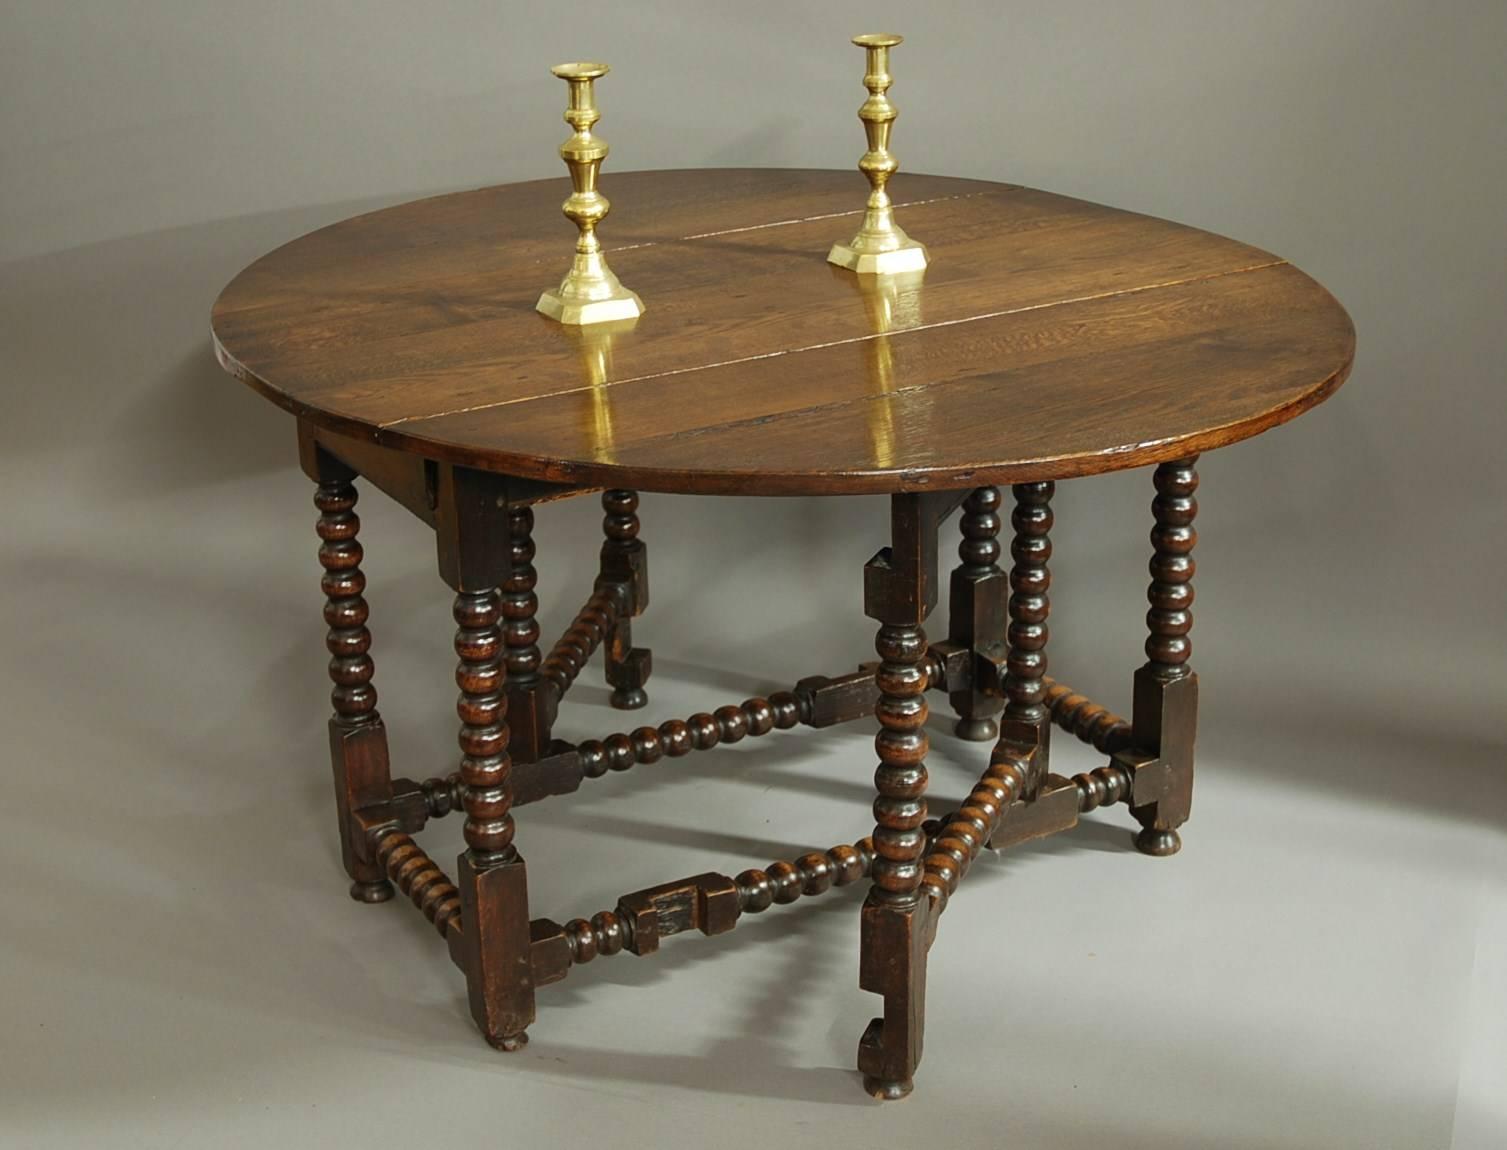 A large 17th century oak gateleg table with bobbin turned legs.

This table consists of an oak plank top with one drawer below and is supported by bobbin turned legs and stretchers.

When purchased the top was a very dull colour so this has been